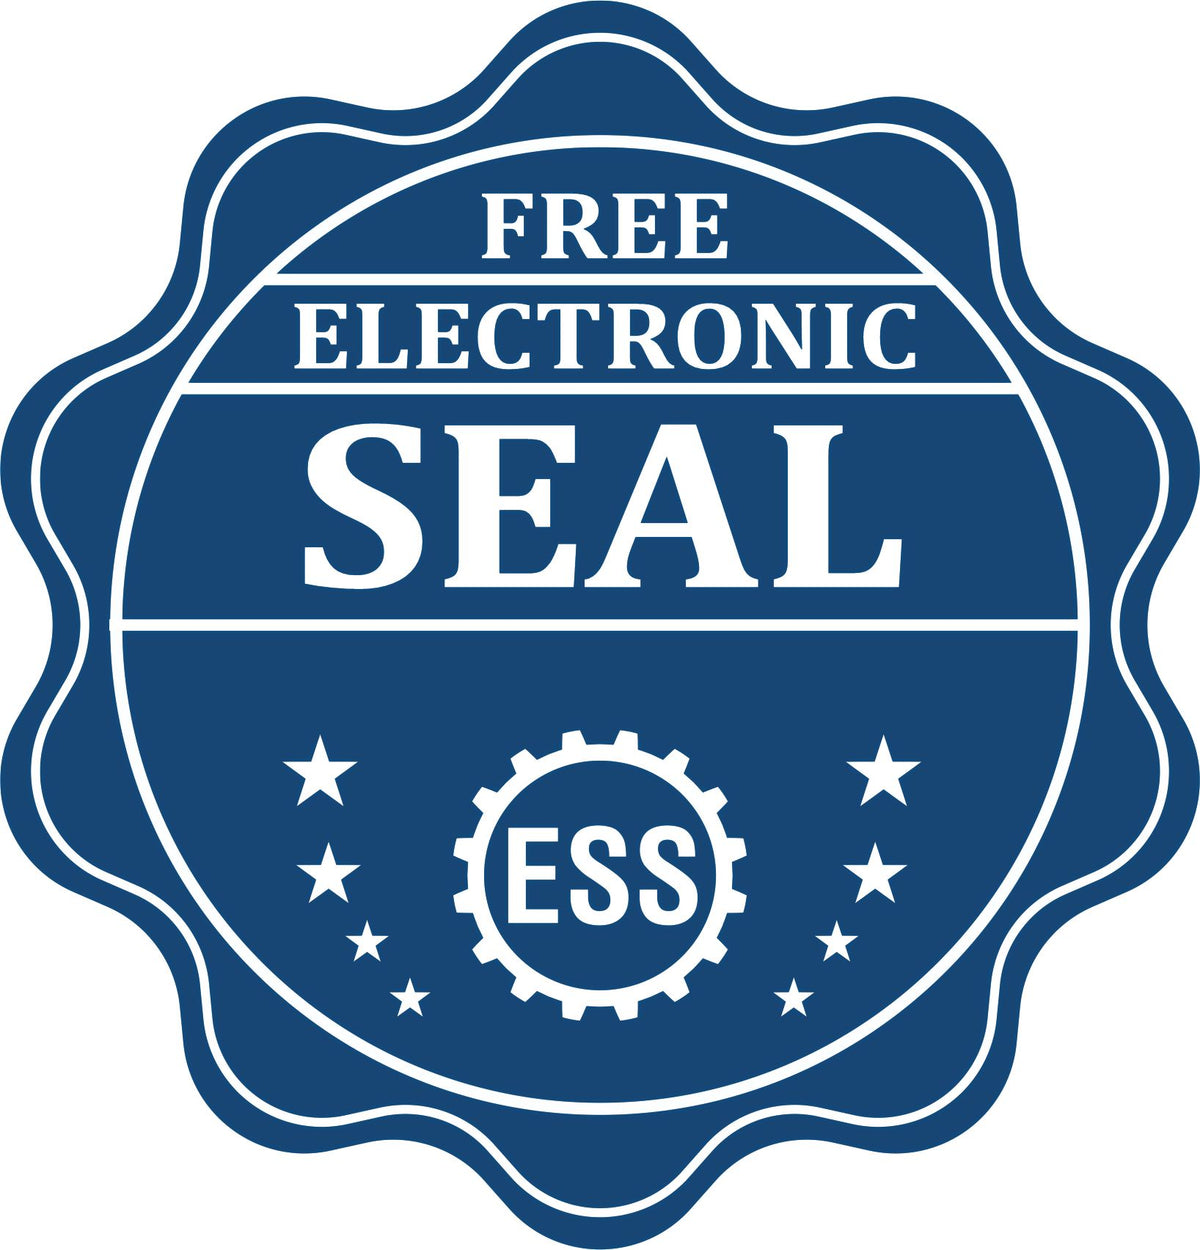 A badge showing a free electronic seal for the Slim Pre-Inked Vermont Professional Engineer Seal Stamp with stars and the ESS gear on the emblem.